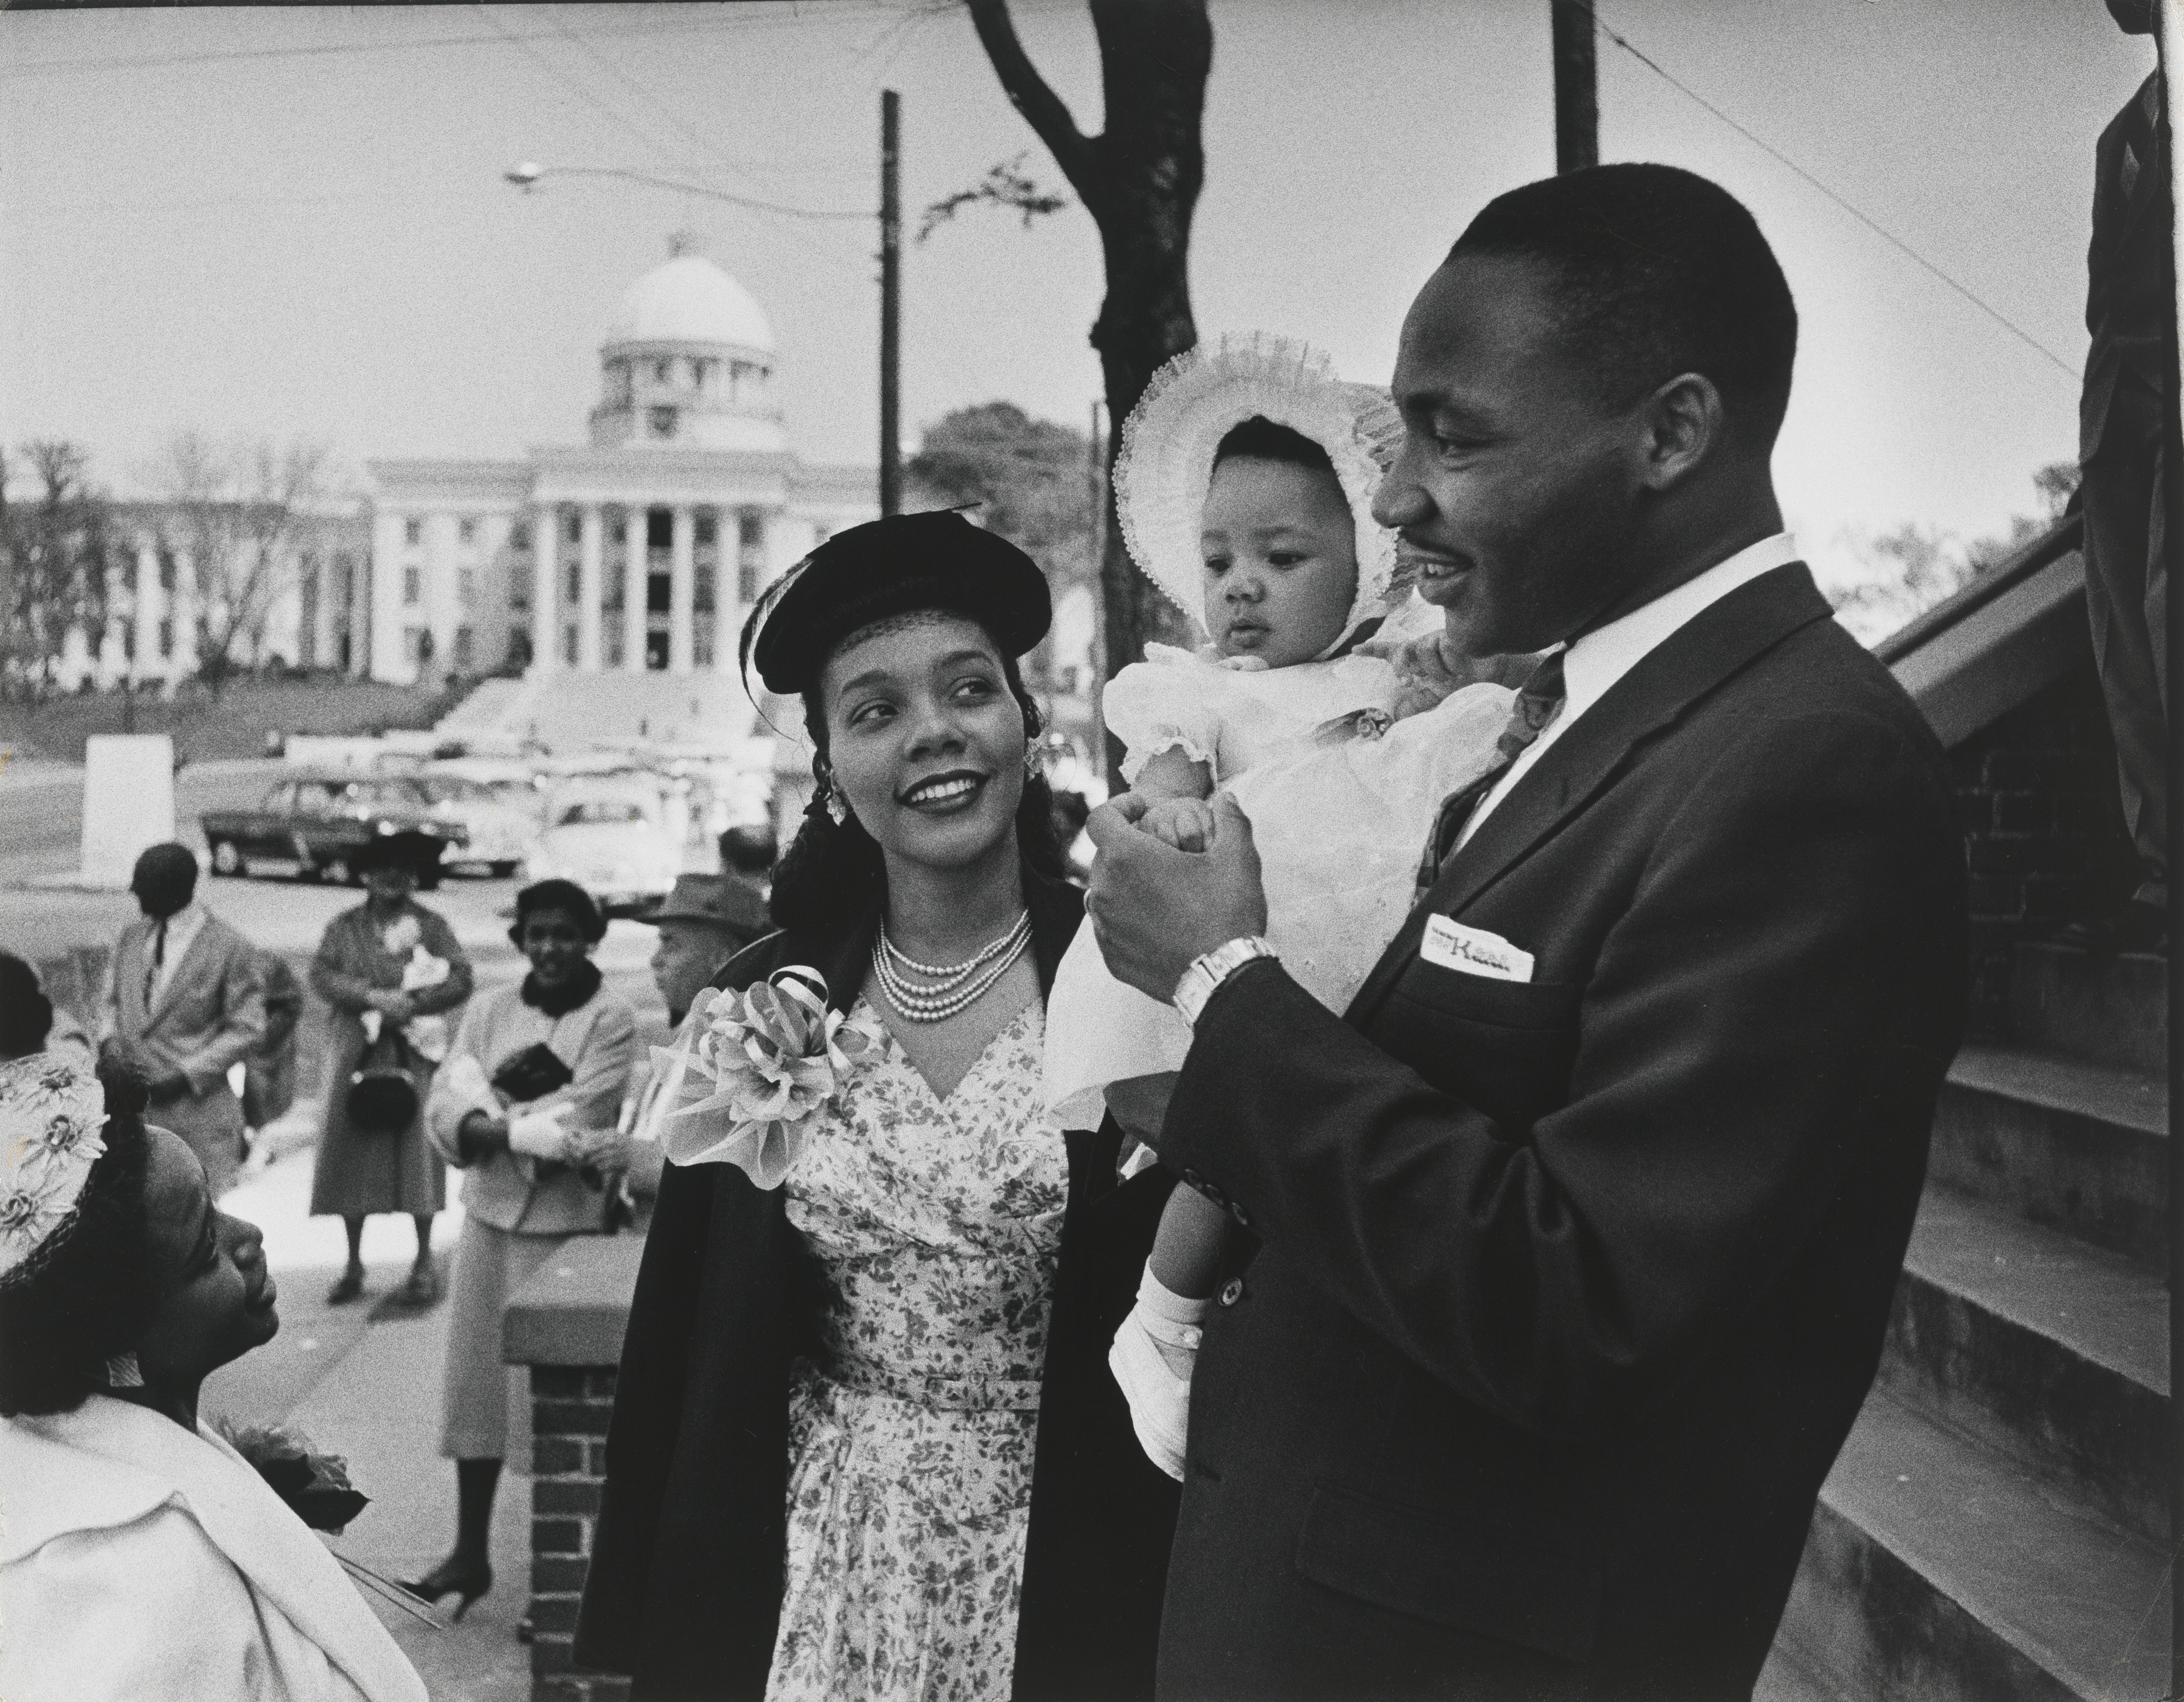 Martin Luther King, Jr. - With Family | Smithsonian Institution3912 x 3048